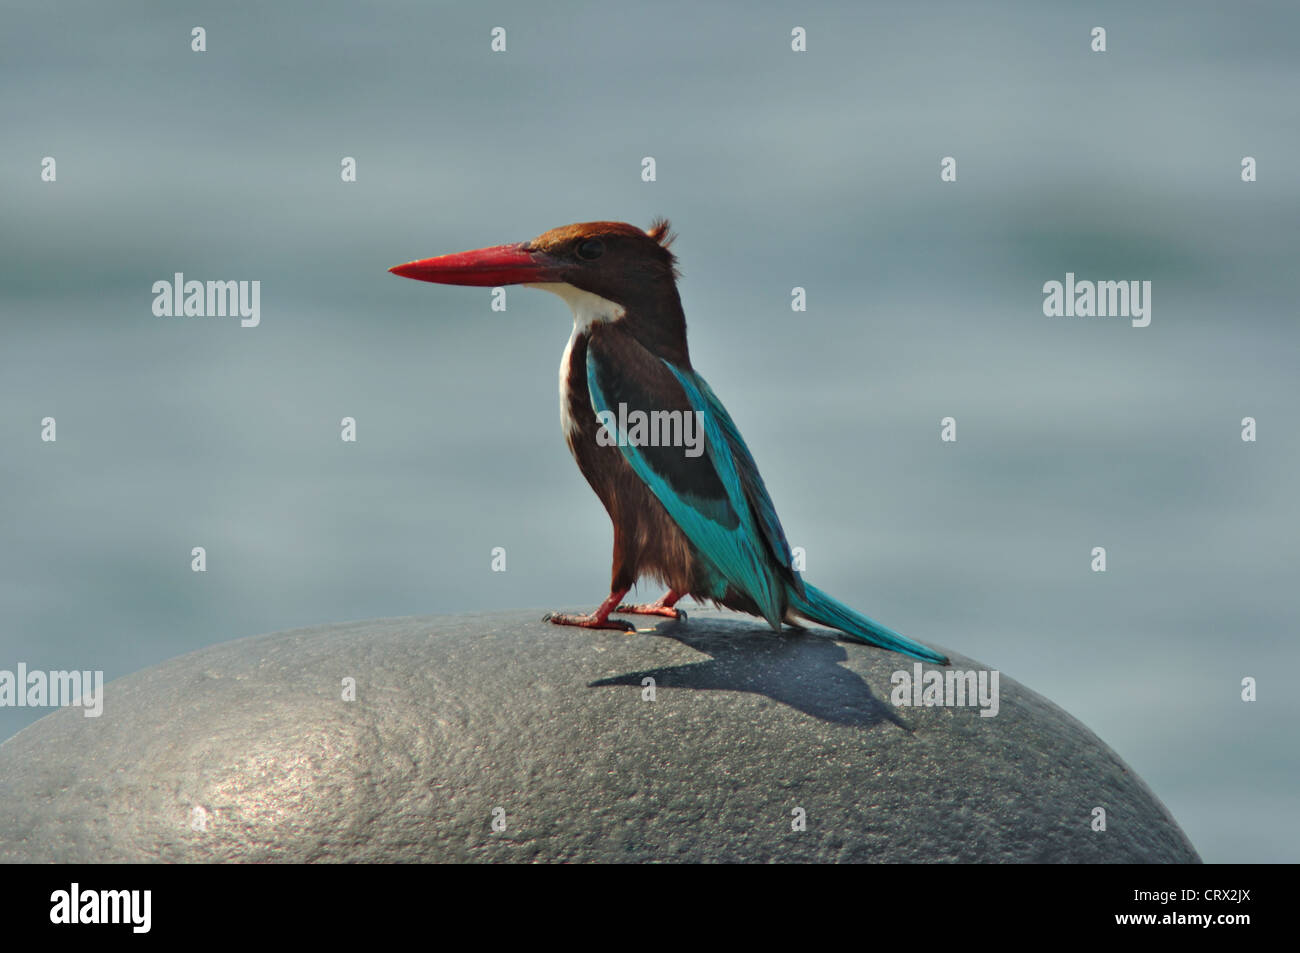 White-throated kingfisher (Halcyon smyrnensis) Stock Photo